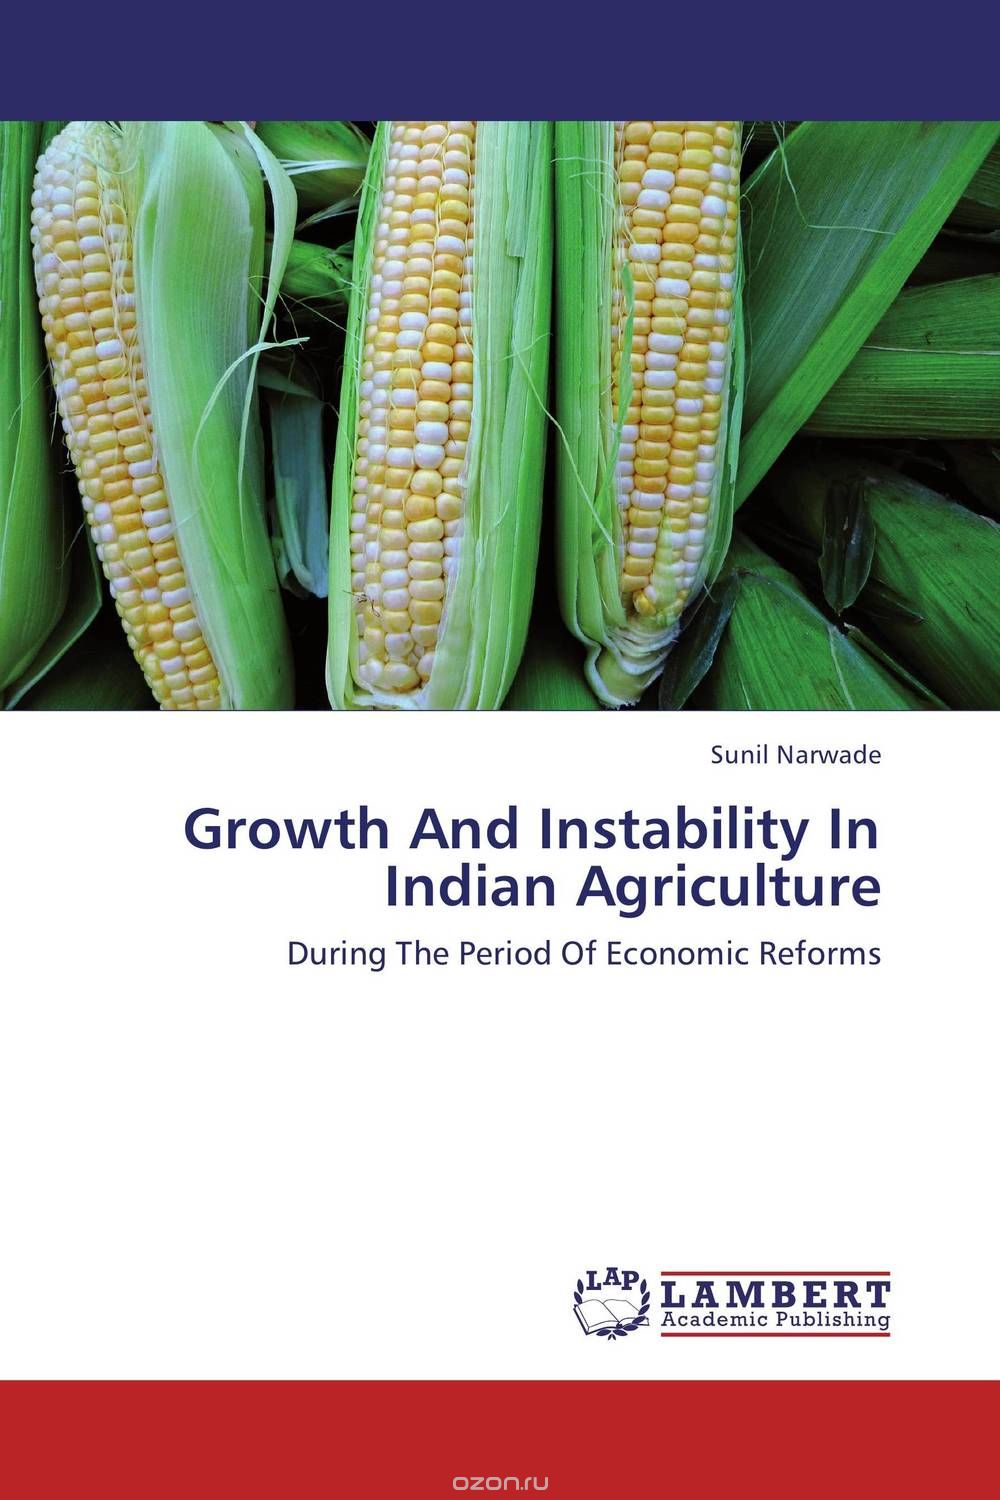 Скачать книгу "Growth And Instability In Indian Agriculture"